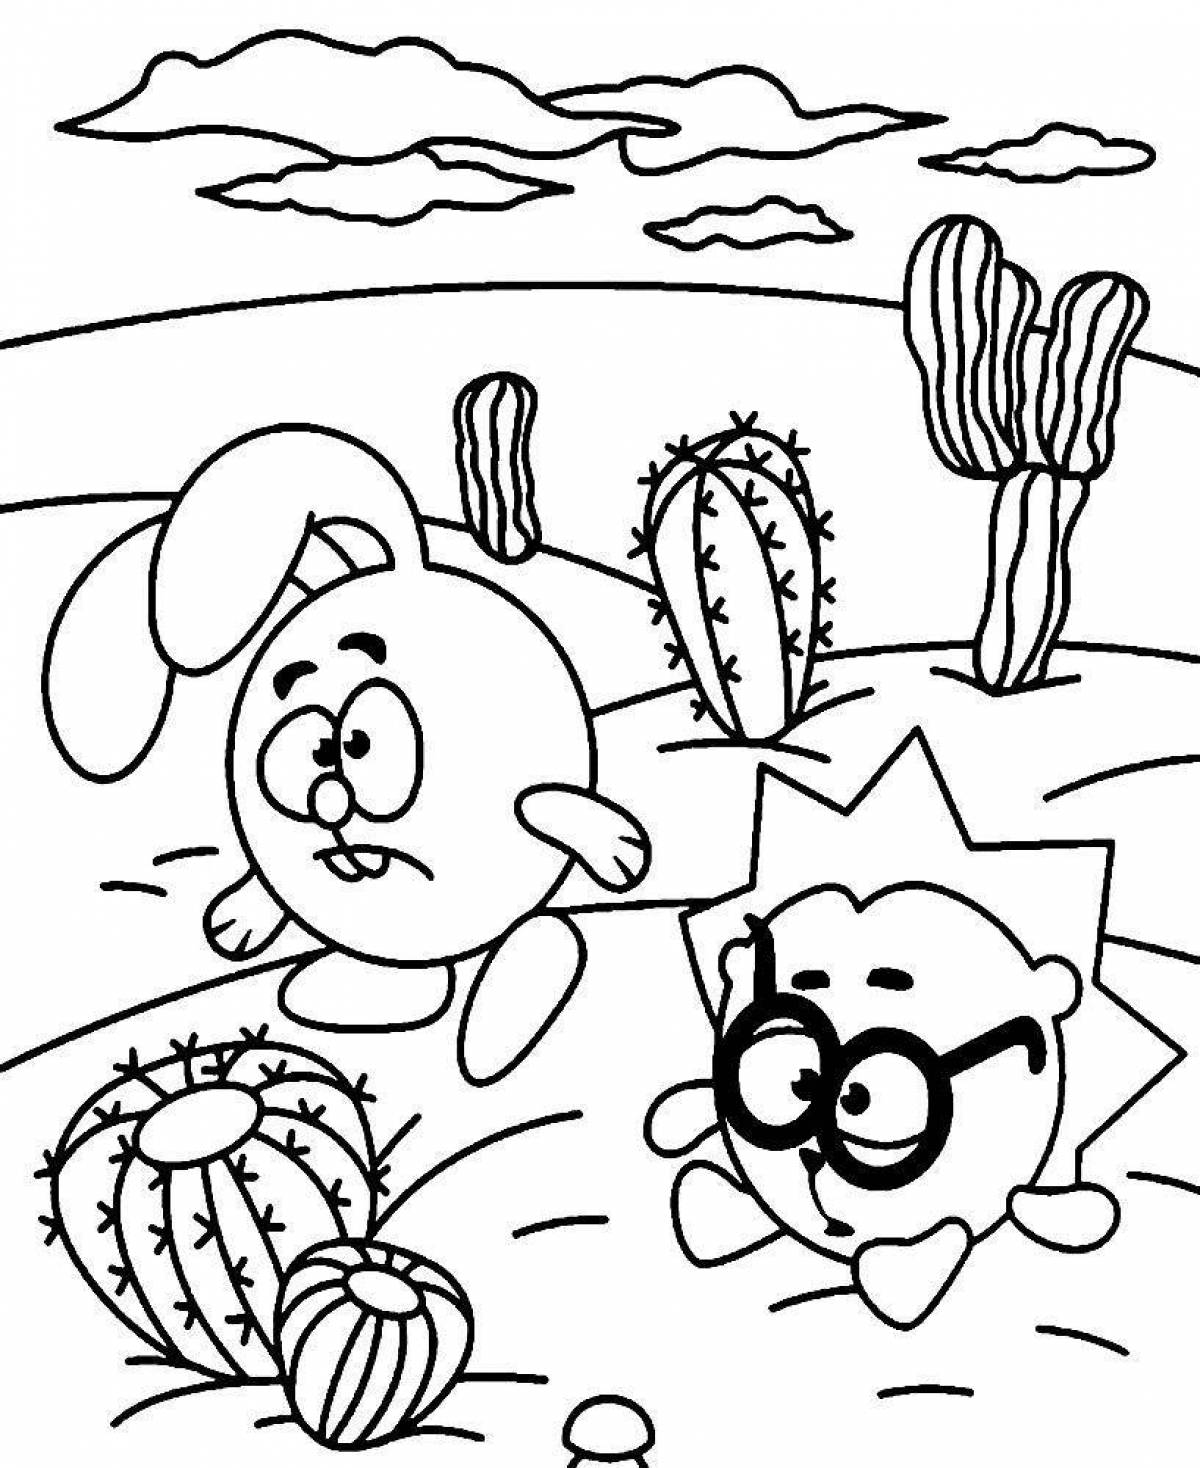 Bright coloring pages for coloring